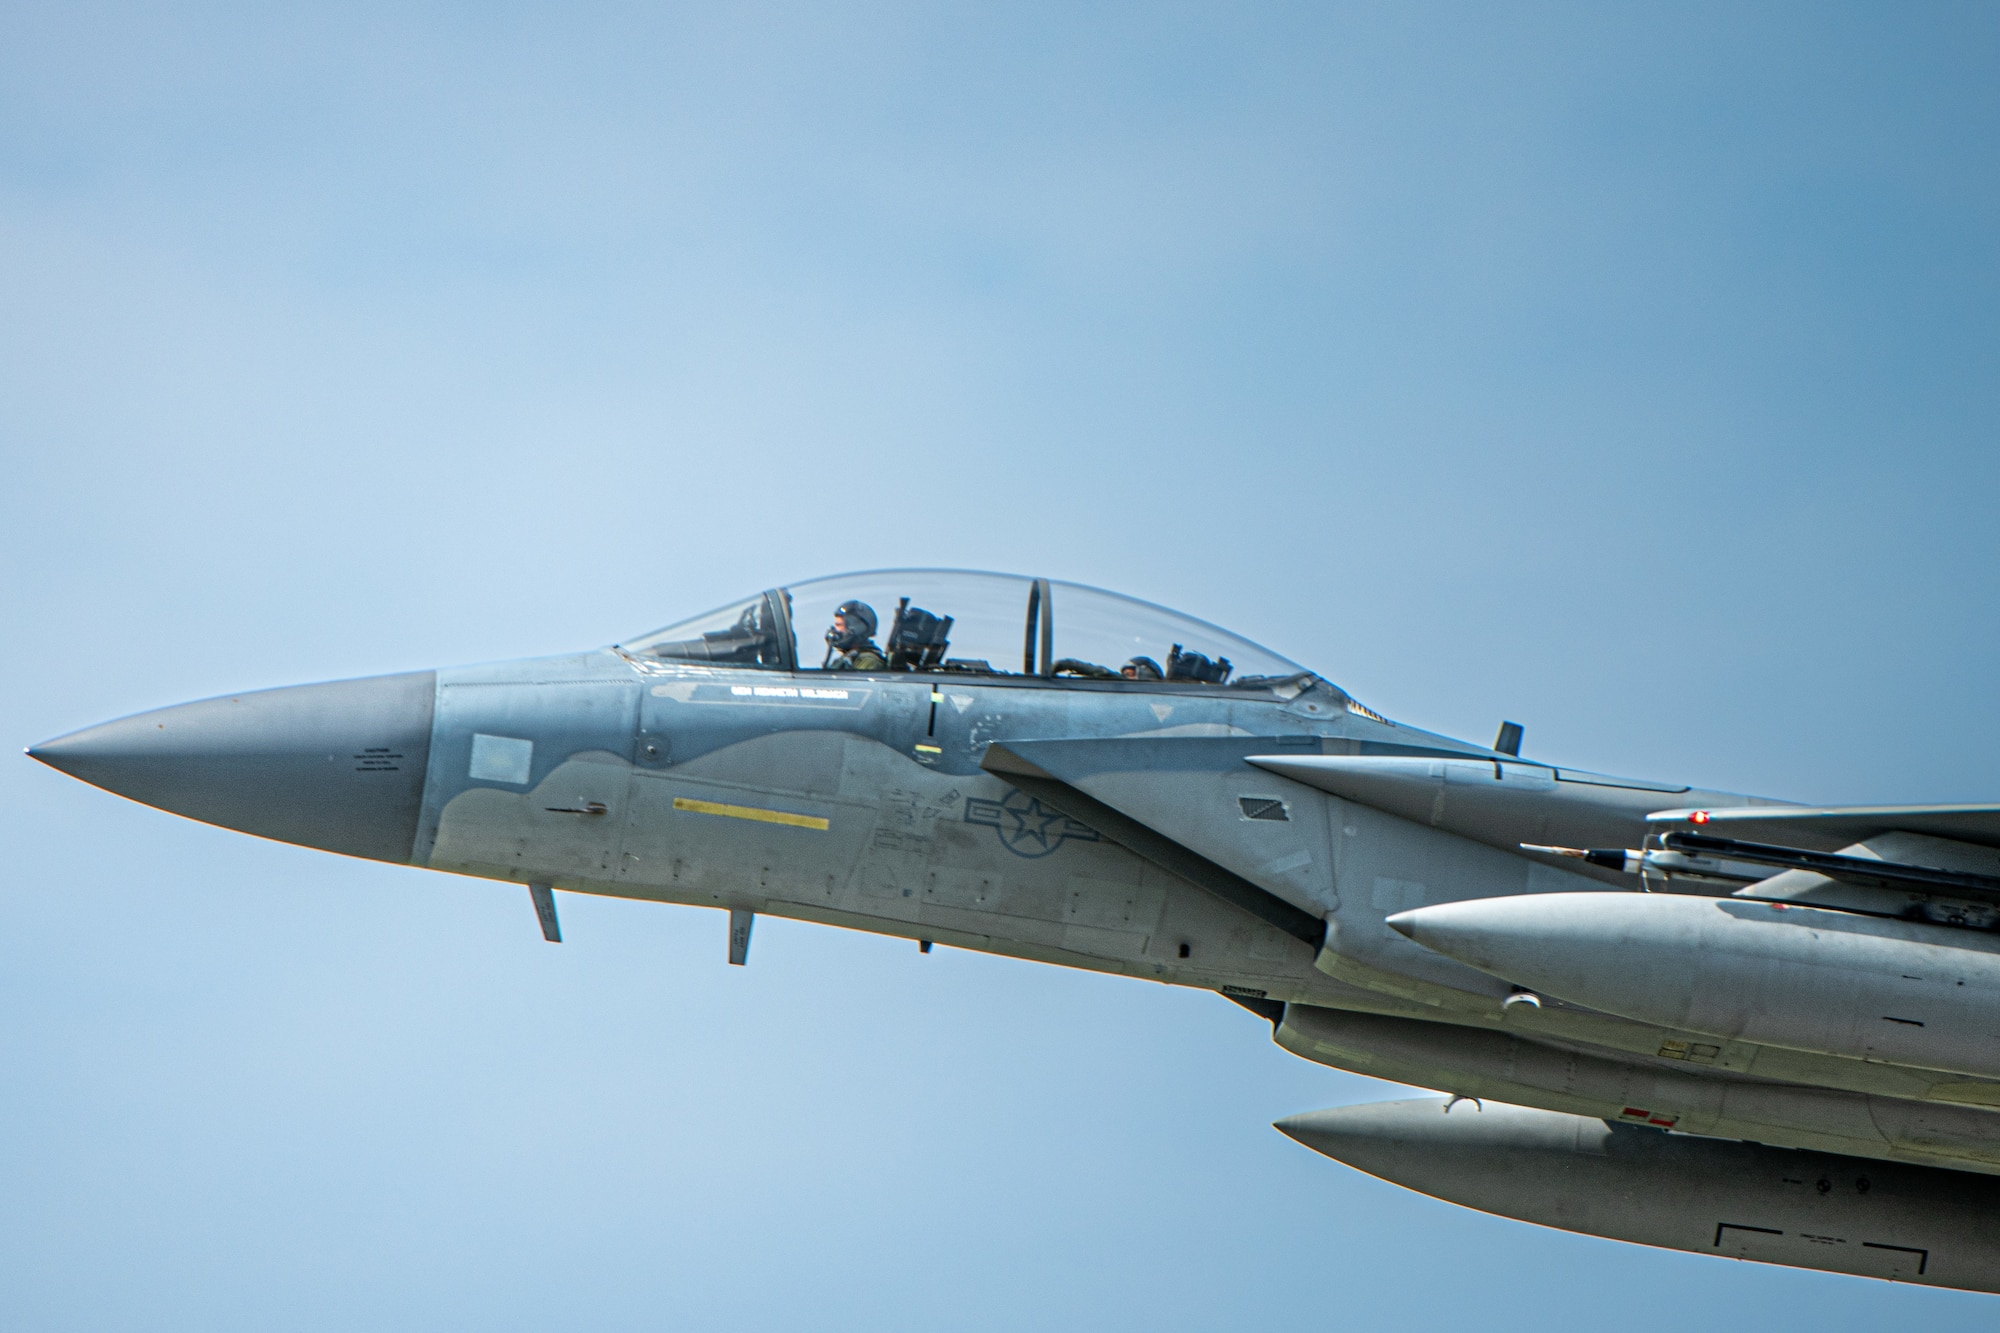 Airmen take off in a jet.